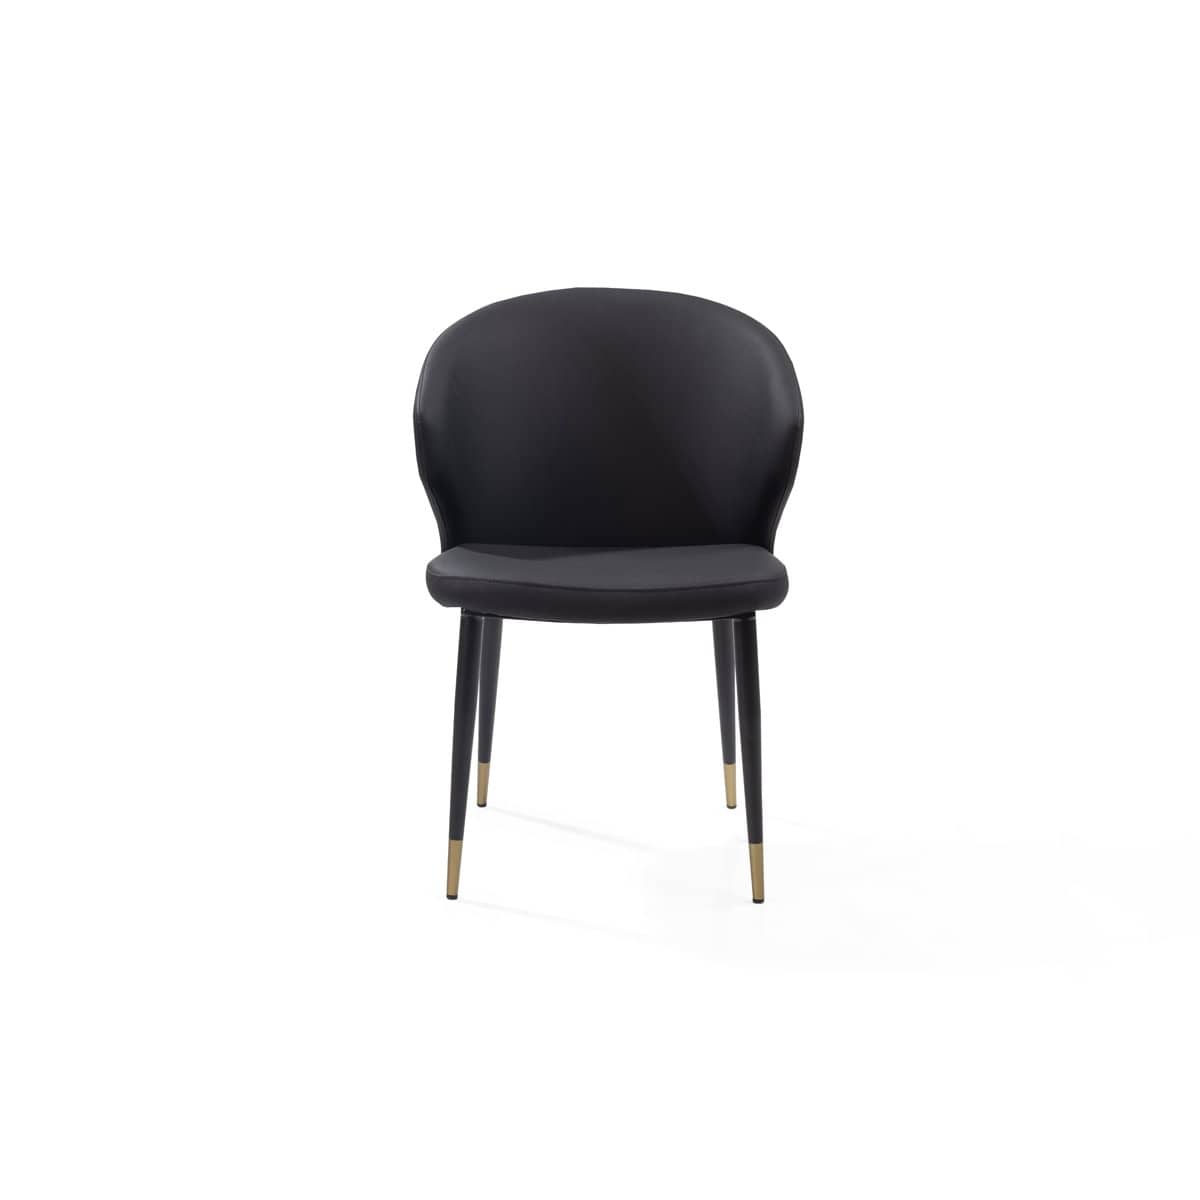 Express Dining Chair - Bellroy Black Leather